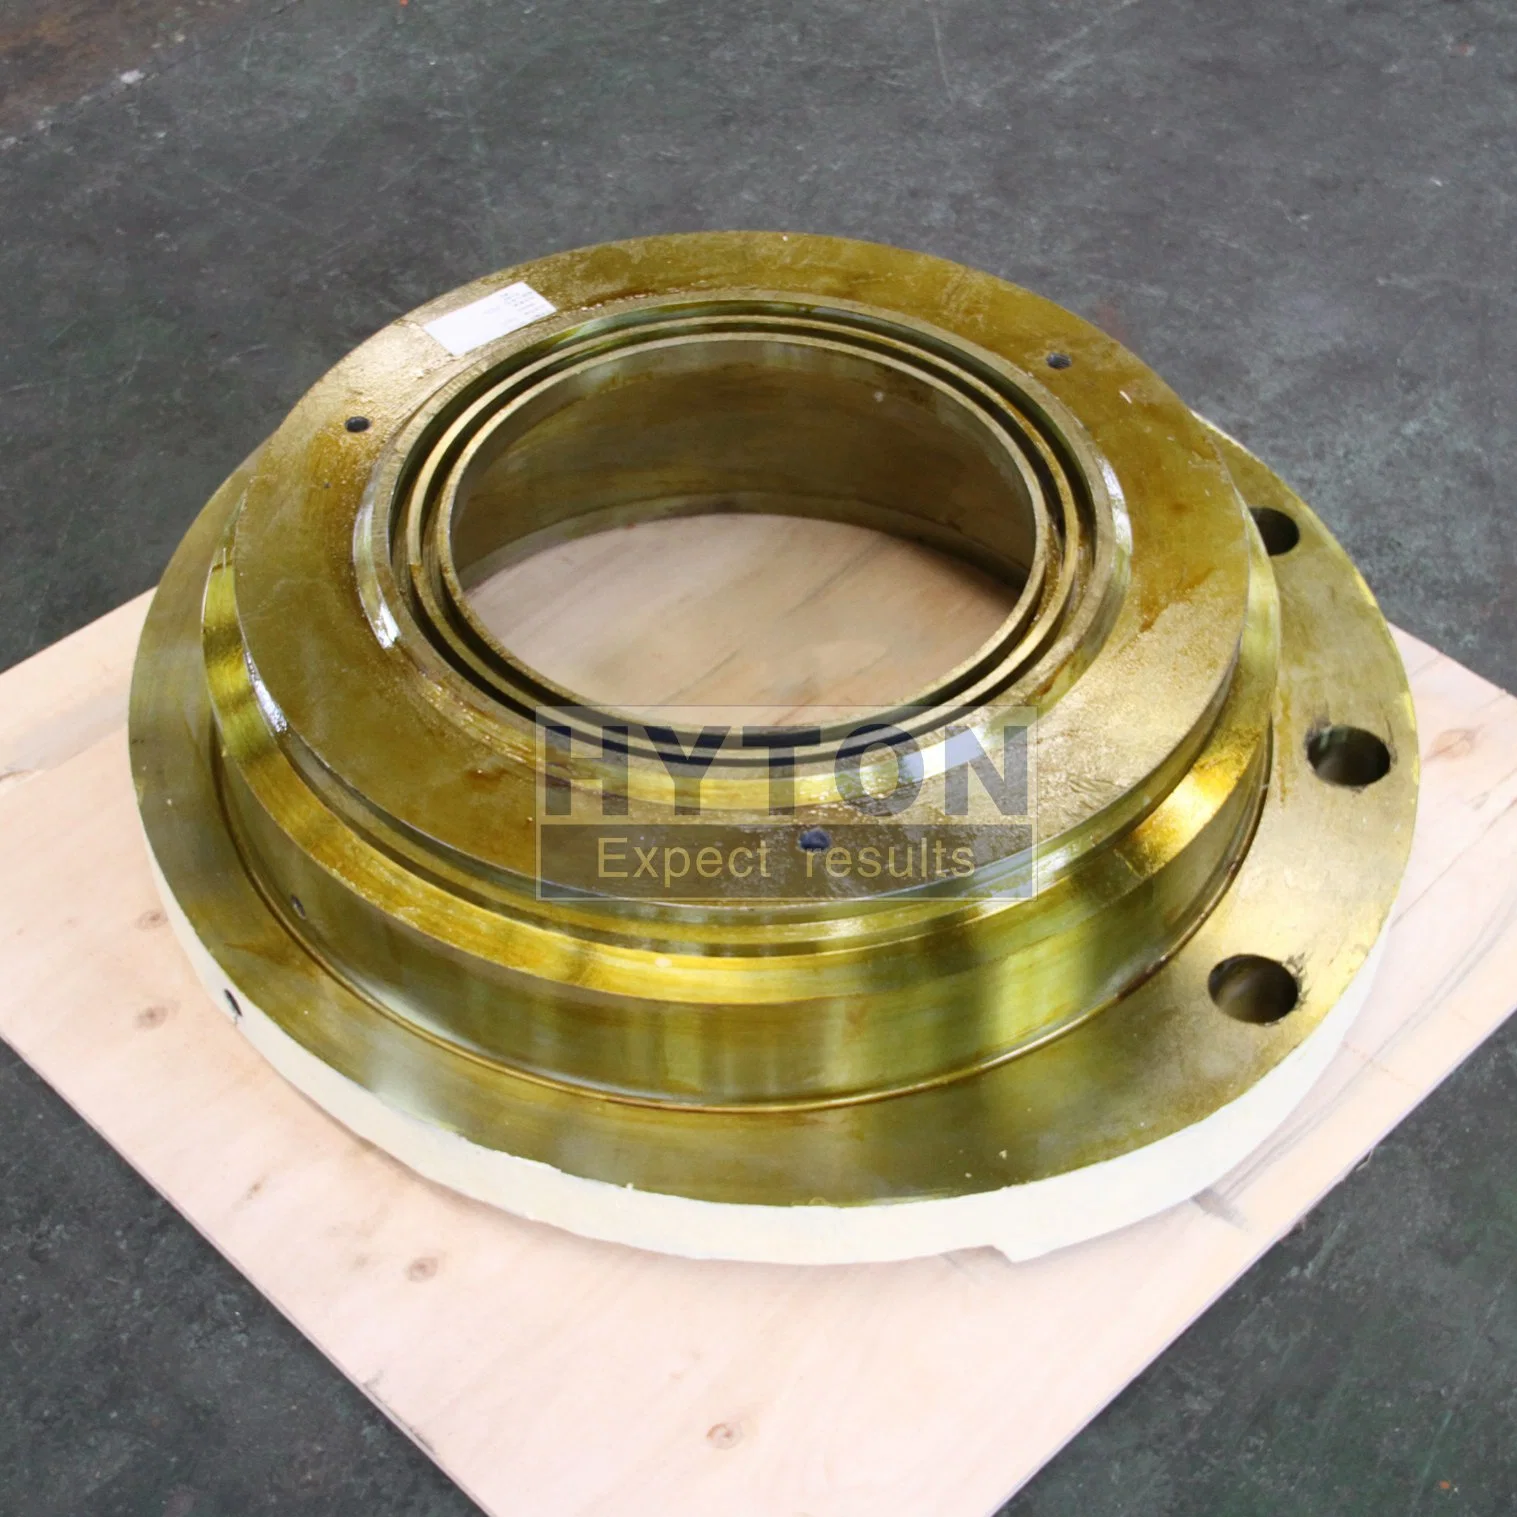 Hyton Stone Crusher Spare Parts Bearing Housing Suit C120 Jaw Crusher Accessories